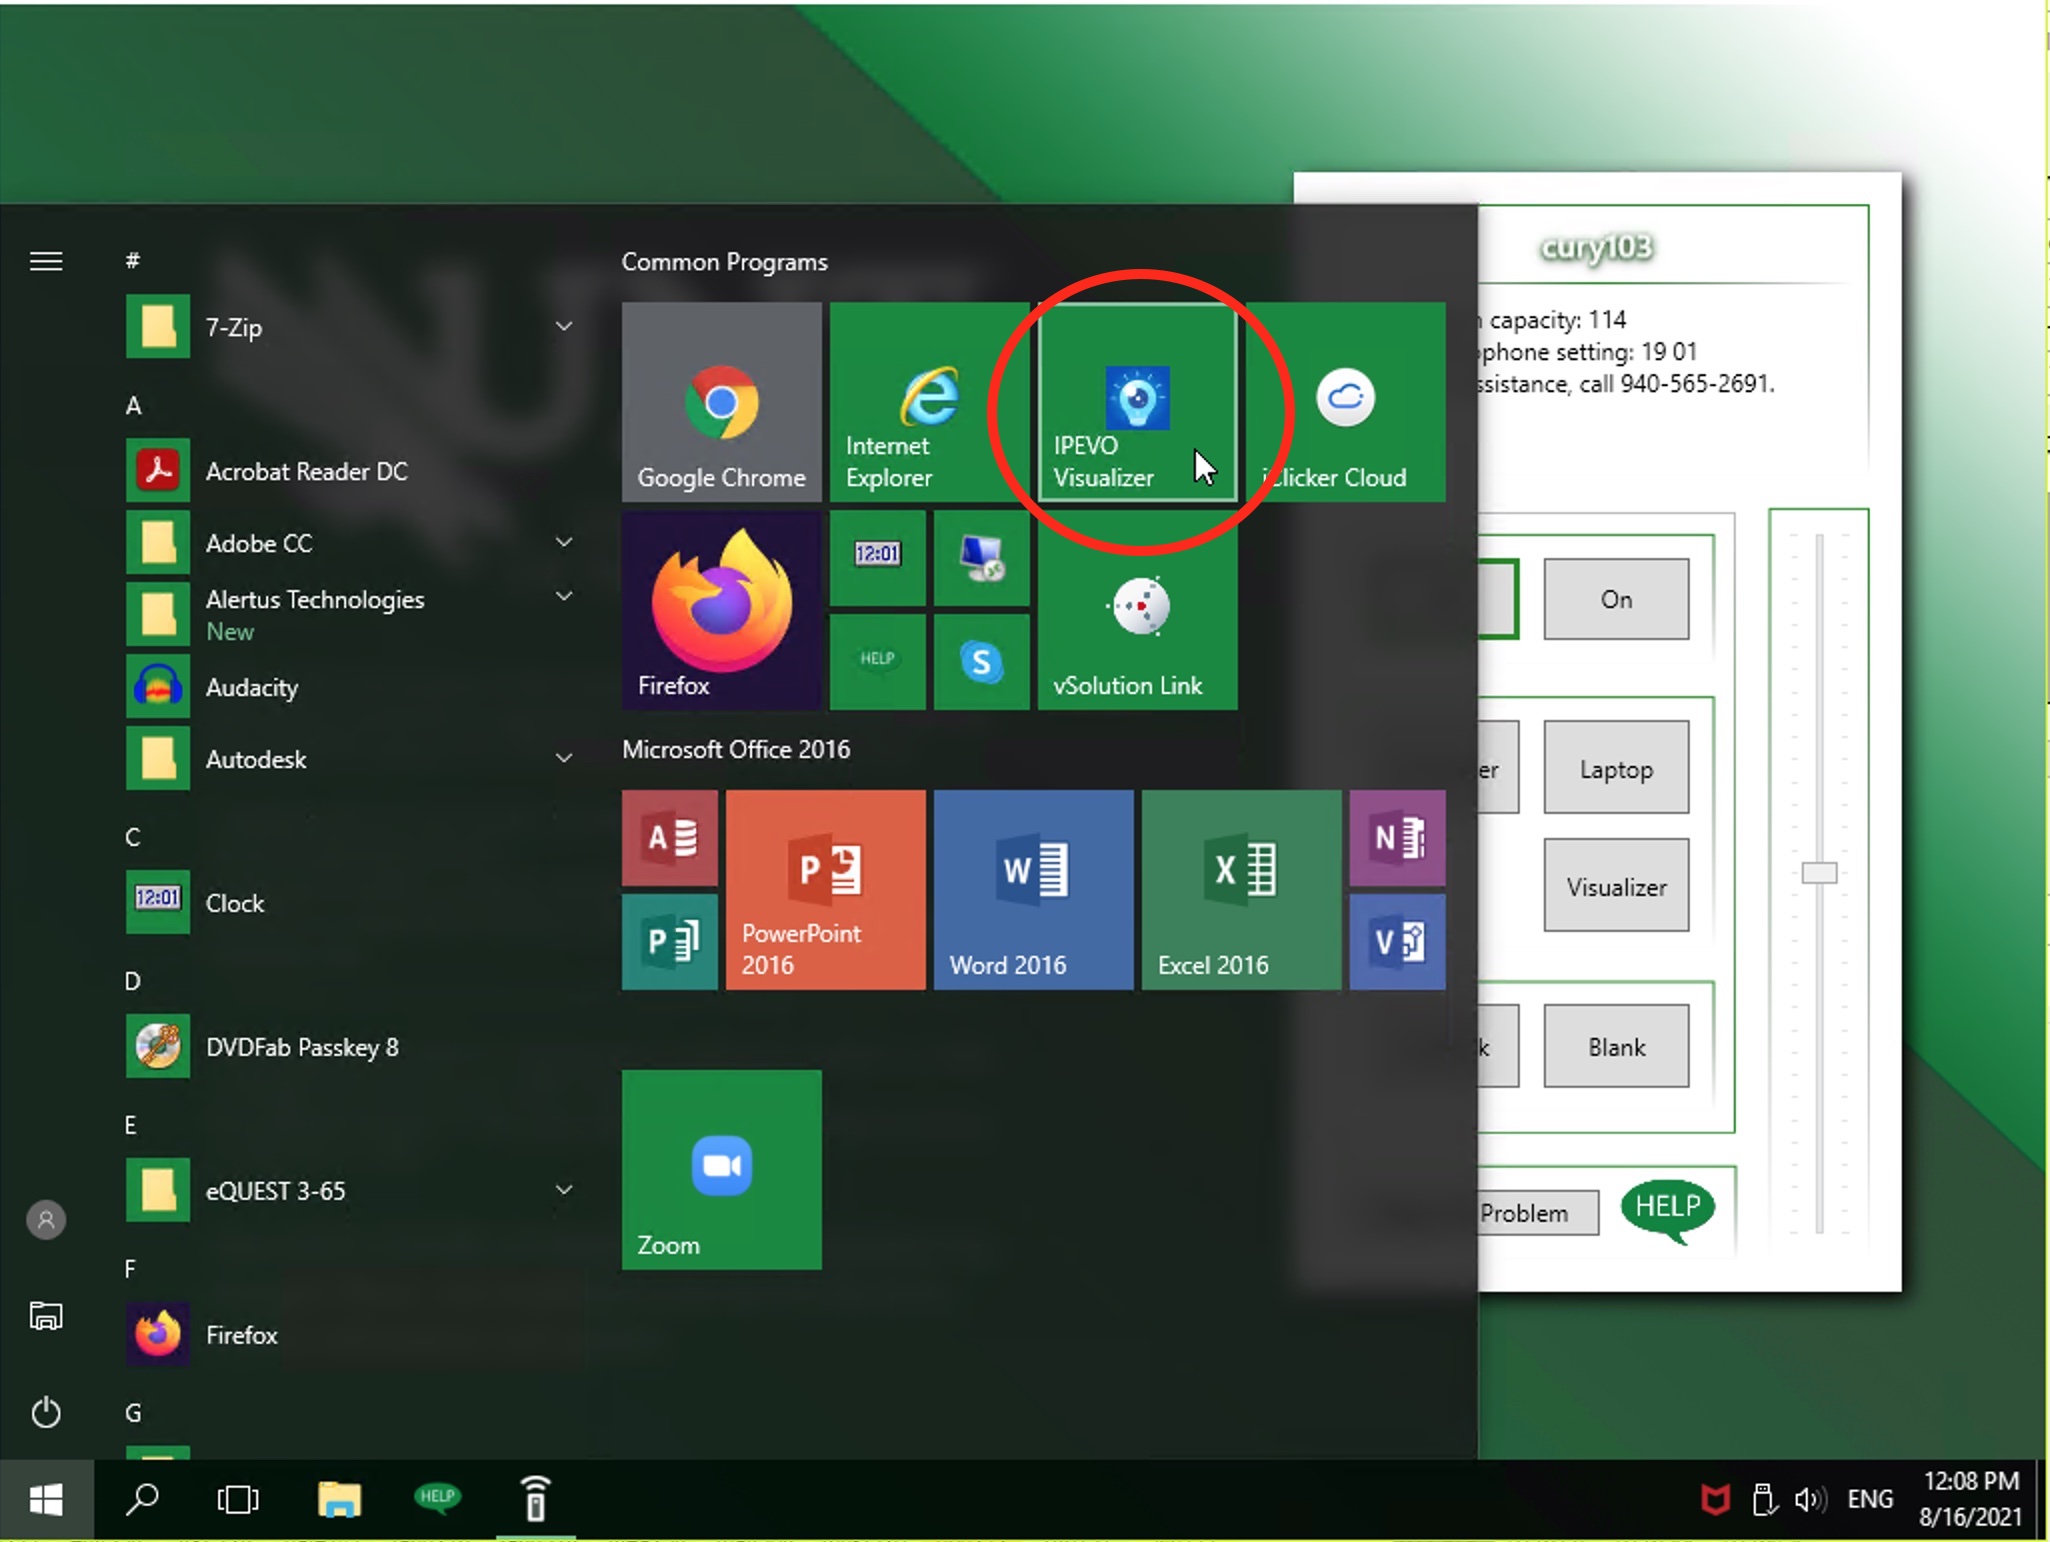 Windows start menu with the IPEVO application circled in red